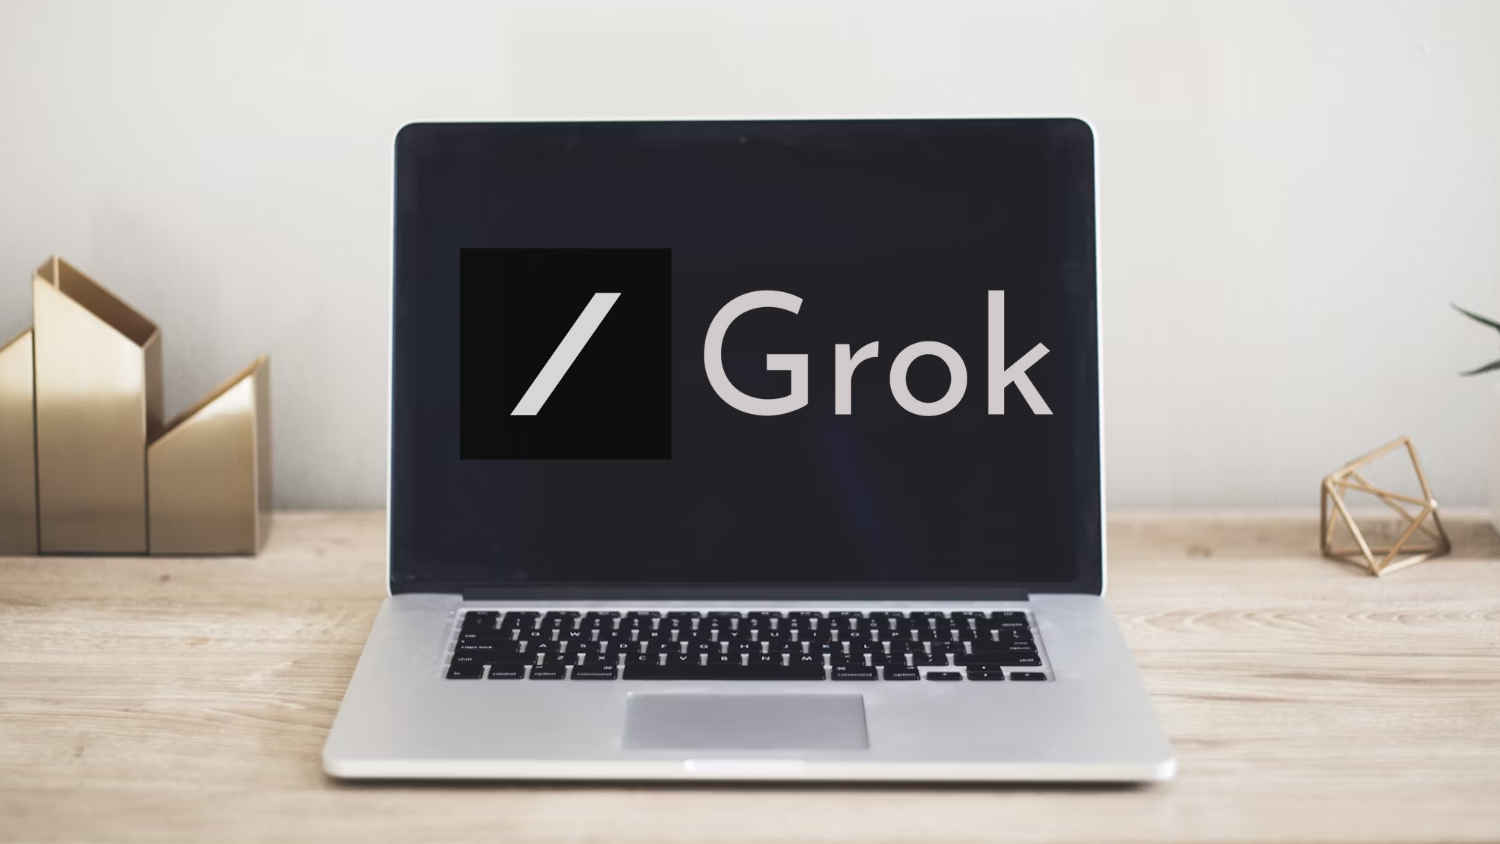 Elon Musk’s Grok is now available for X premium users too! Here’s how to use it